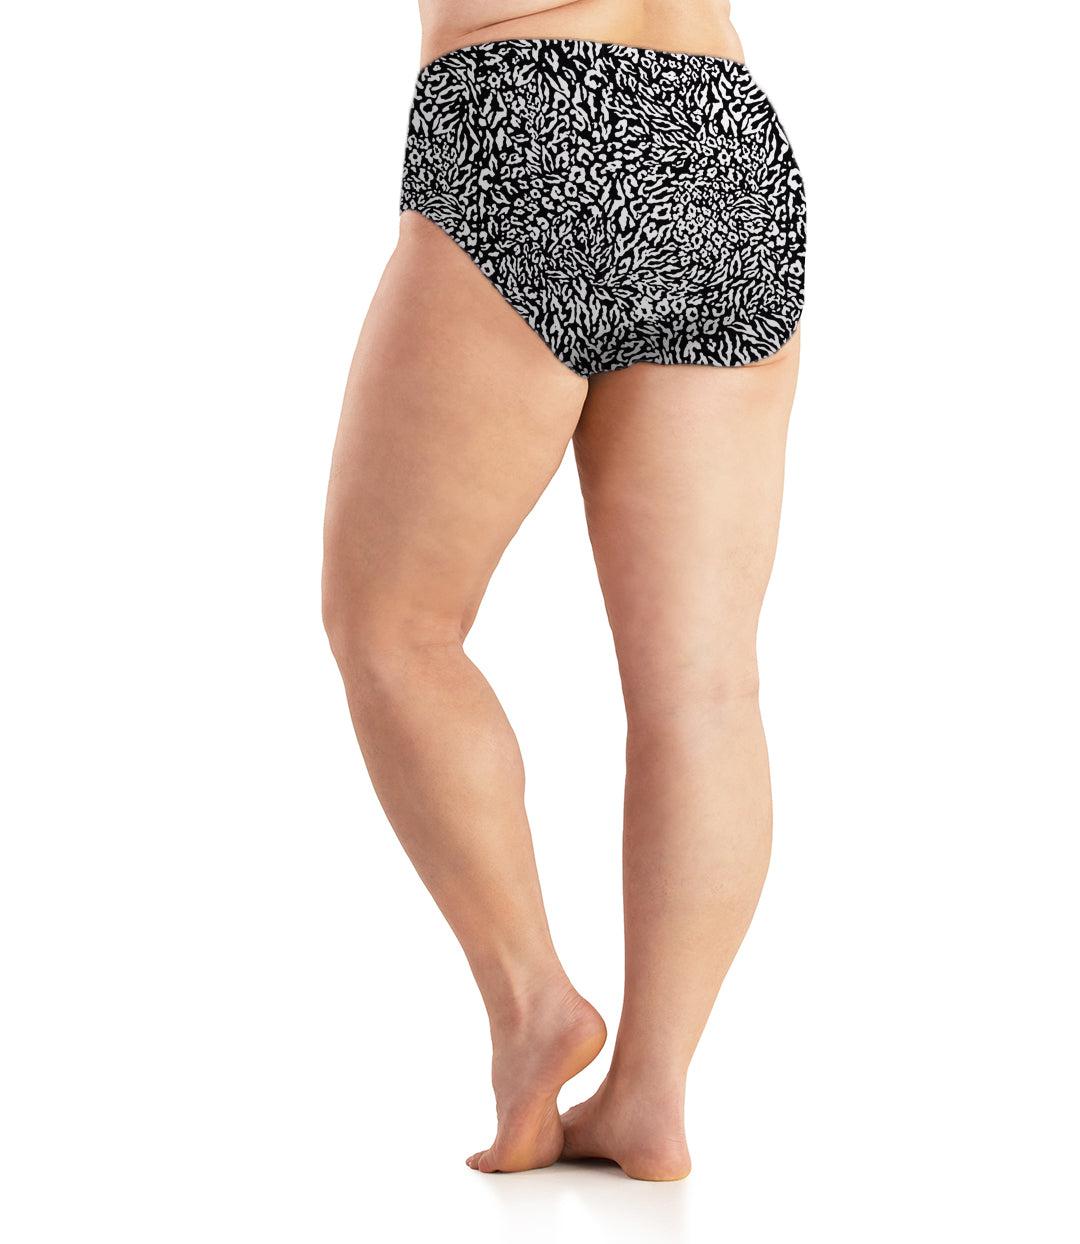 Bottom half of plus sized woman, back view, wearing JunoActive Junowear Cotton Stretch Classic Brief in wild print. This brief fits to the waistline with conservative leg opening. Wild print is a black print with white animal spots.